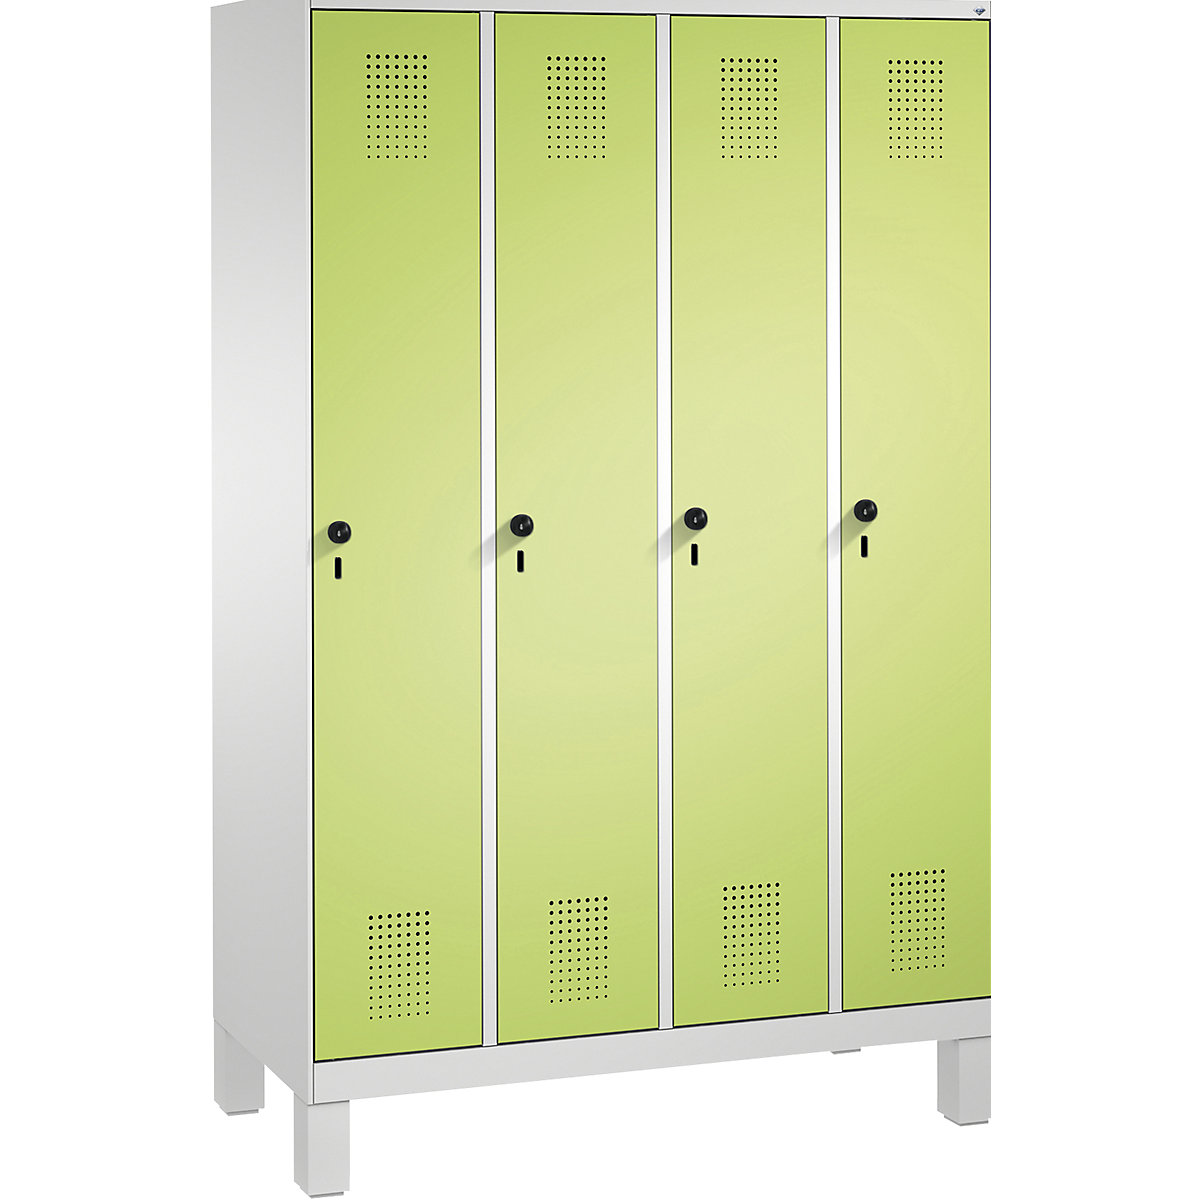 EVOLO cloakroom locker, with feet – C+P, 4 compartments, compartment width 300 mm, light grey / viridian green-6